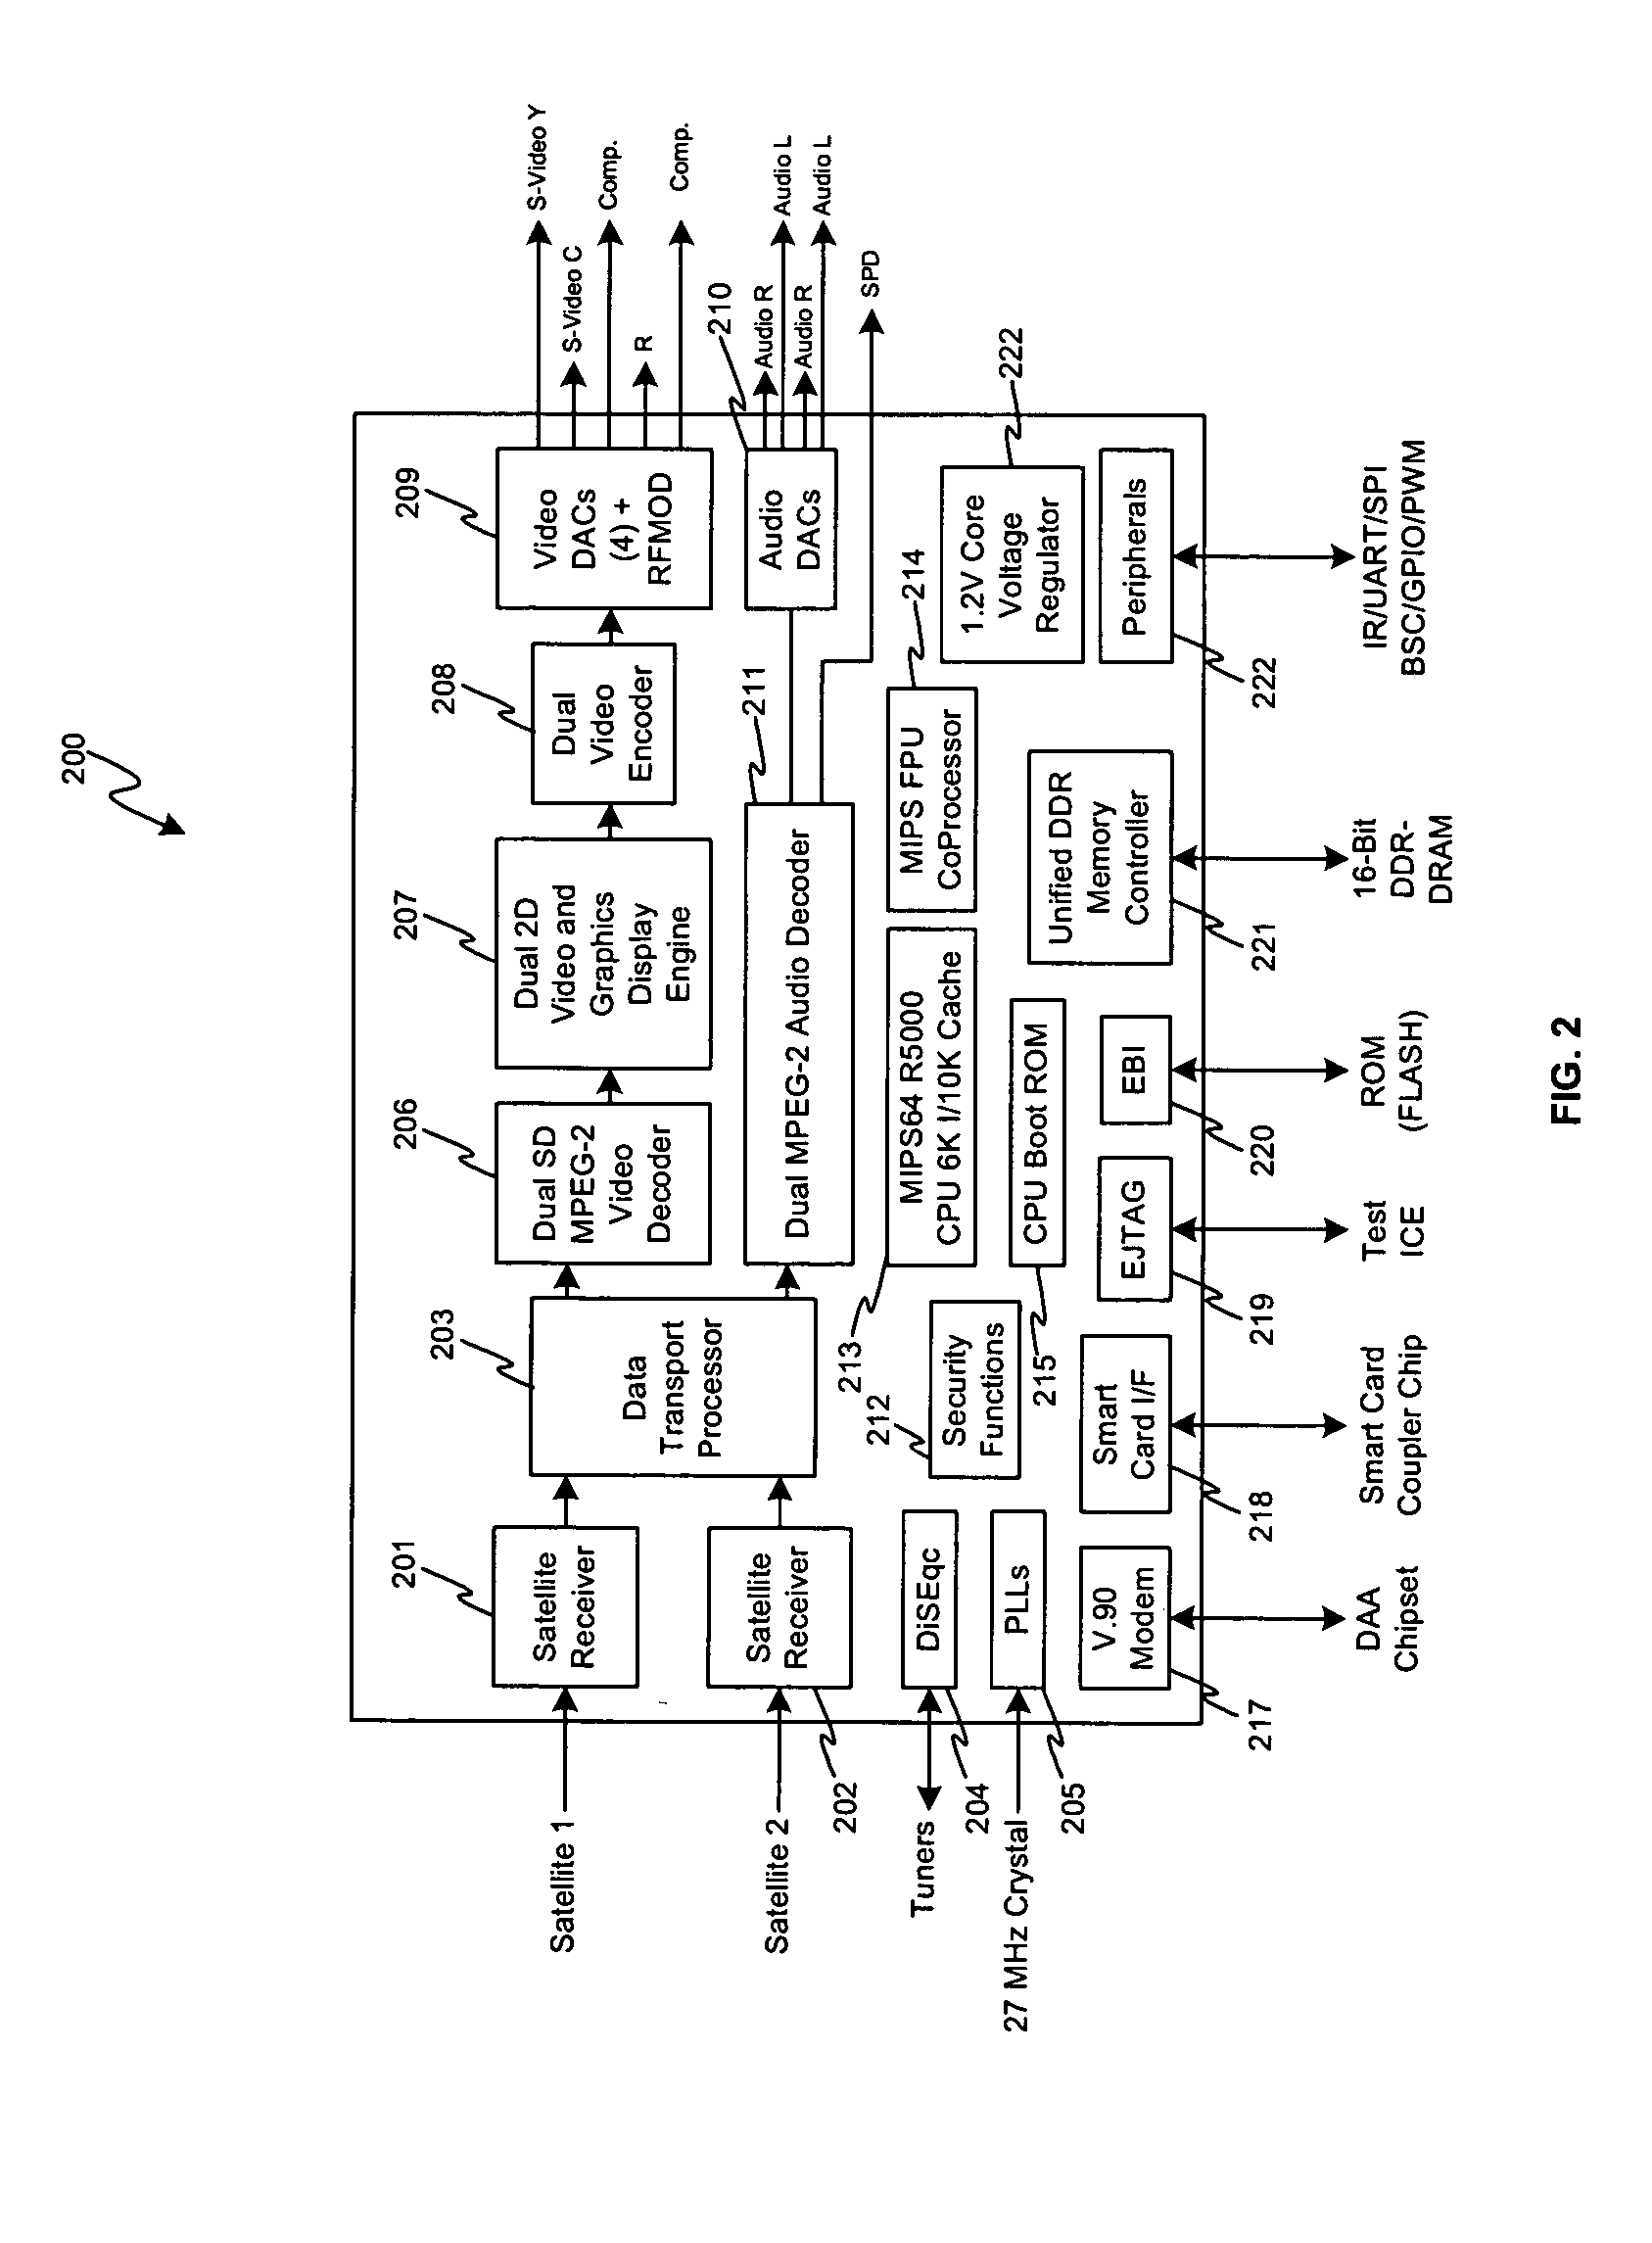 Method and system for single chip satellite set-top box system